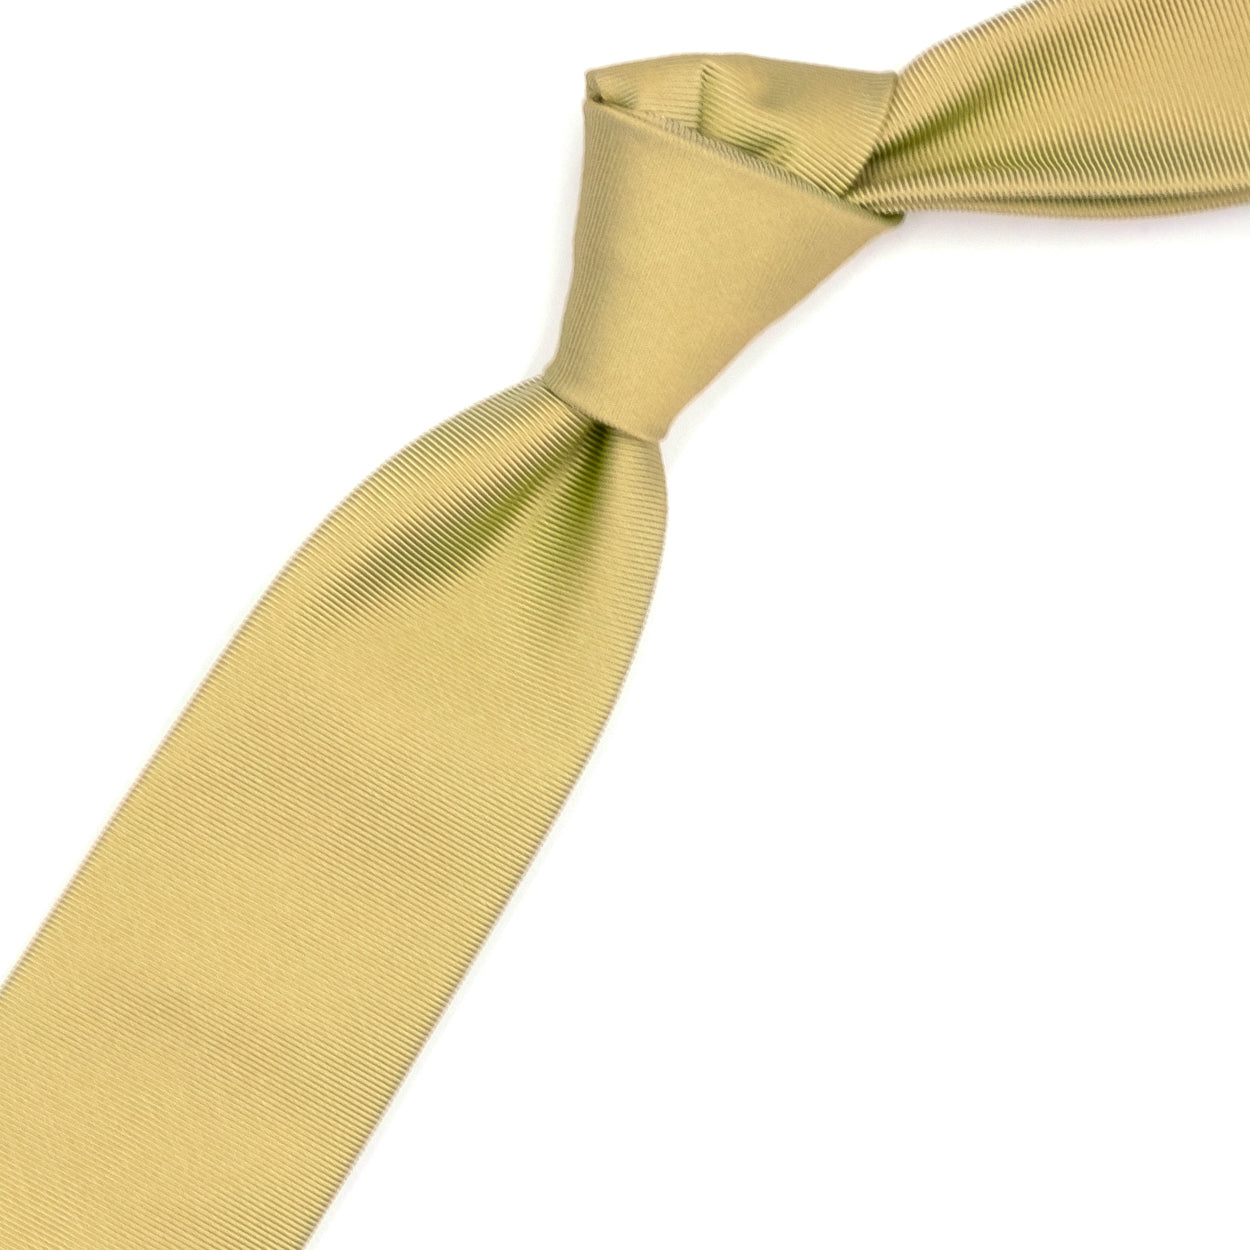 Solid yellow tie